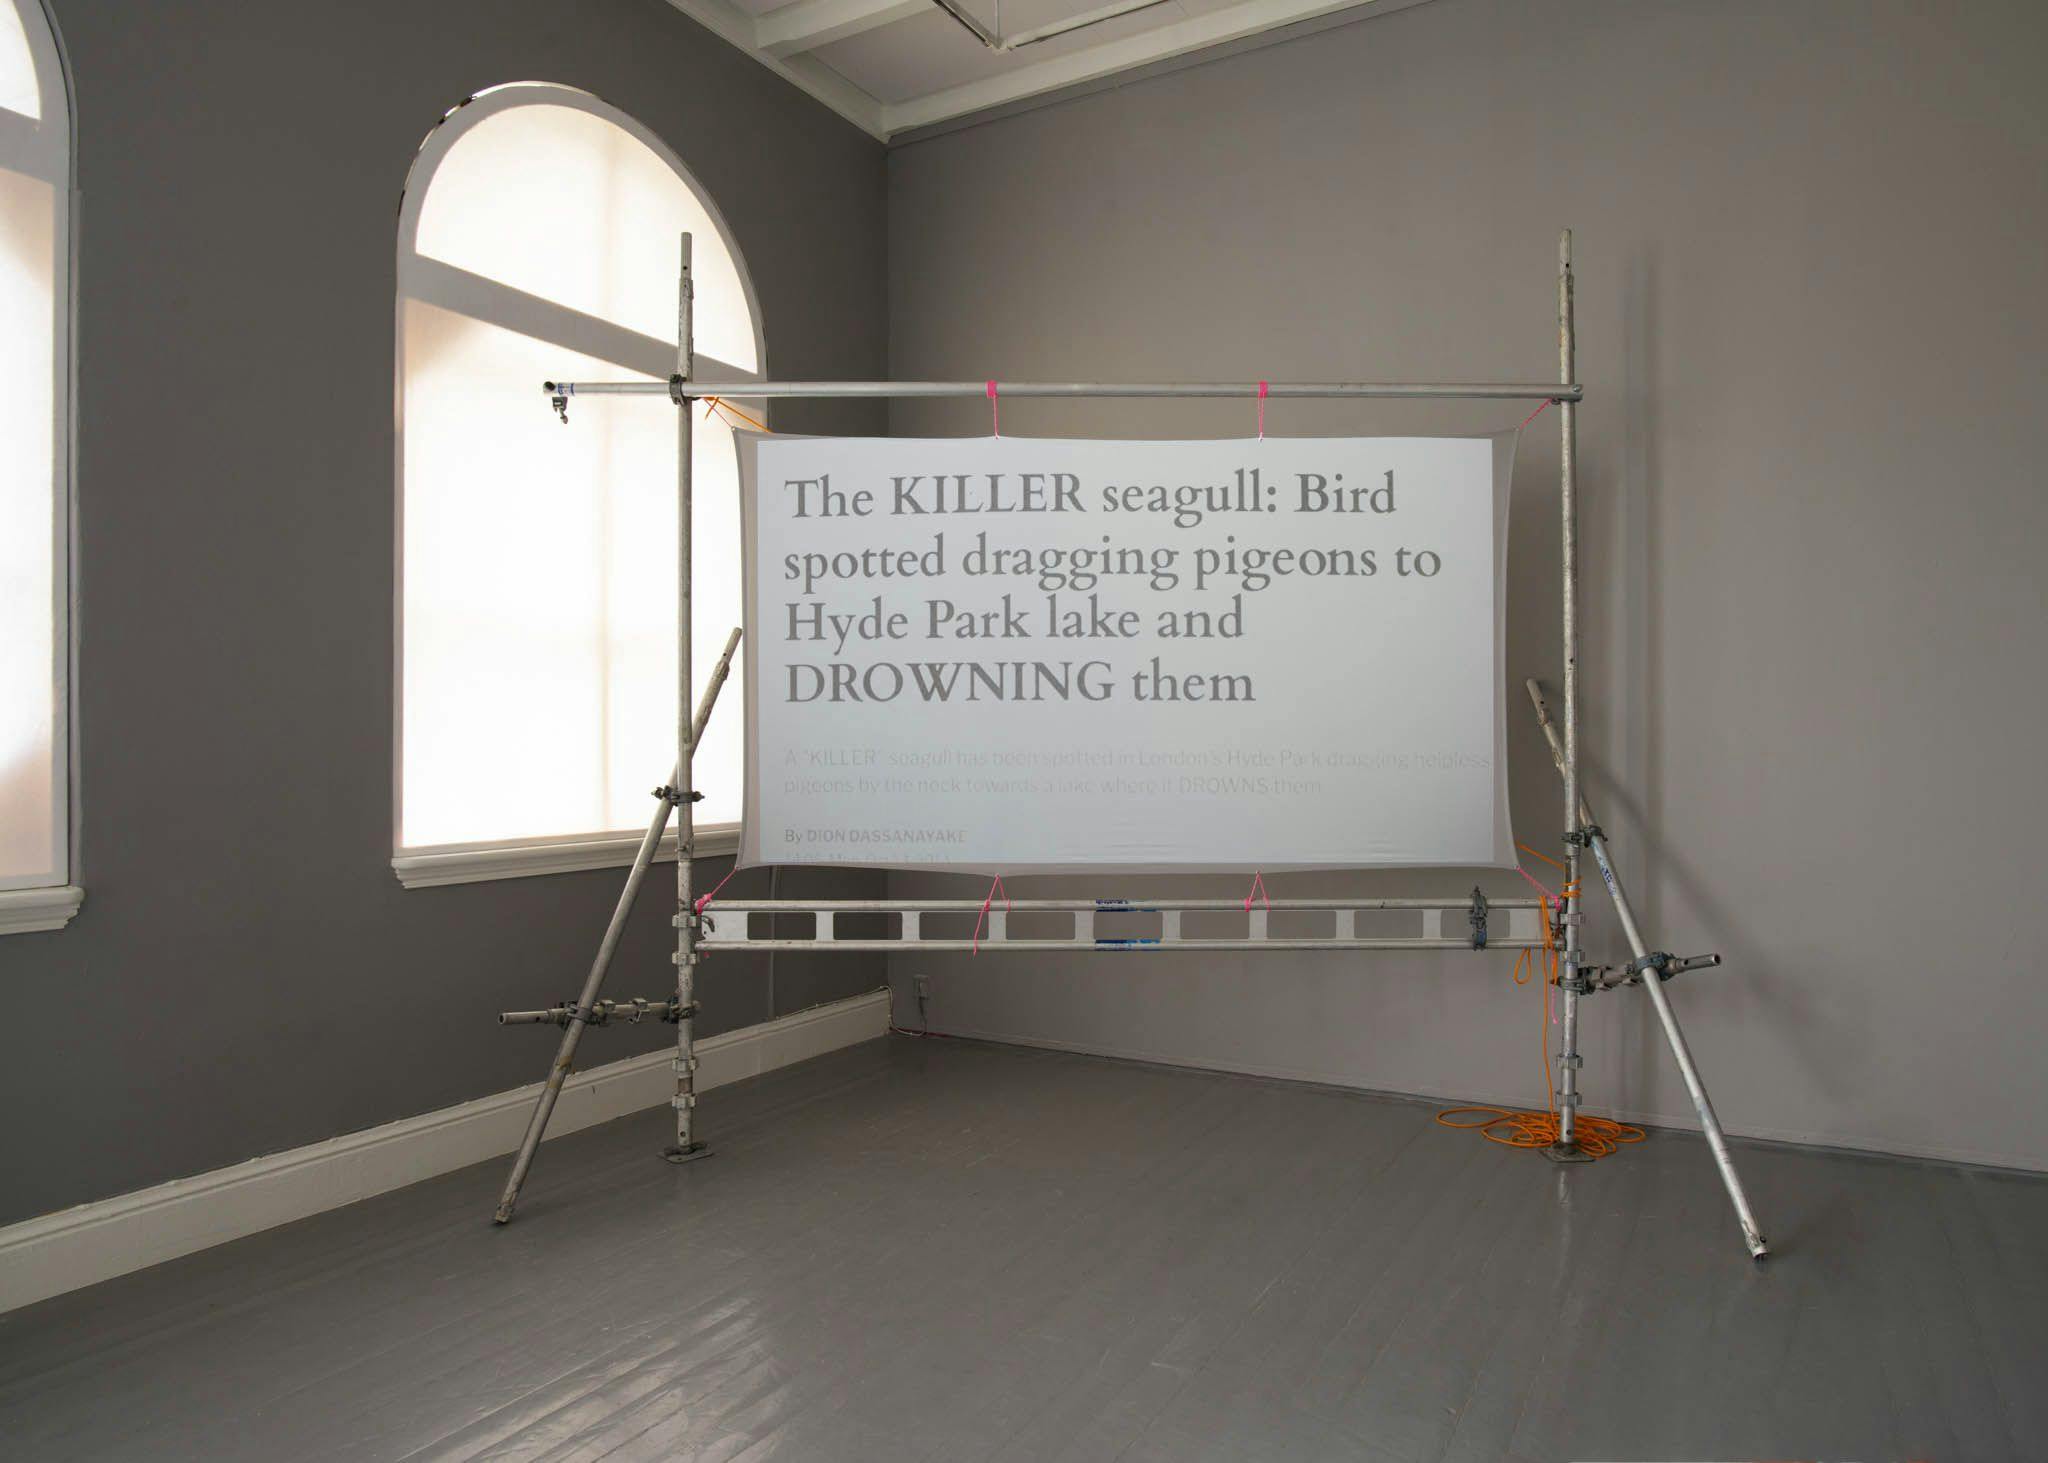 Scaffolding creates a frame for a projection screen. On the screen reads 'The KILLER seagull. Bird spotted dragging pigeons to Hyde Park lake and DROWNING them' 